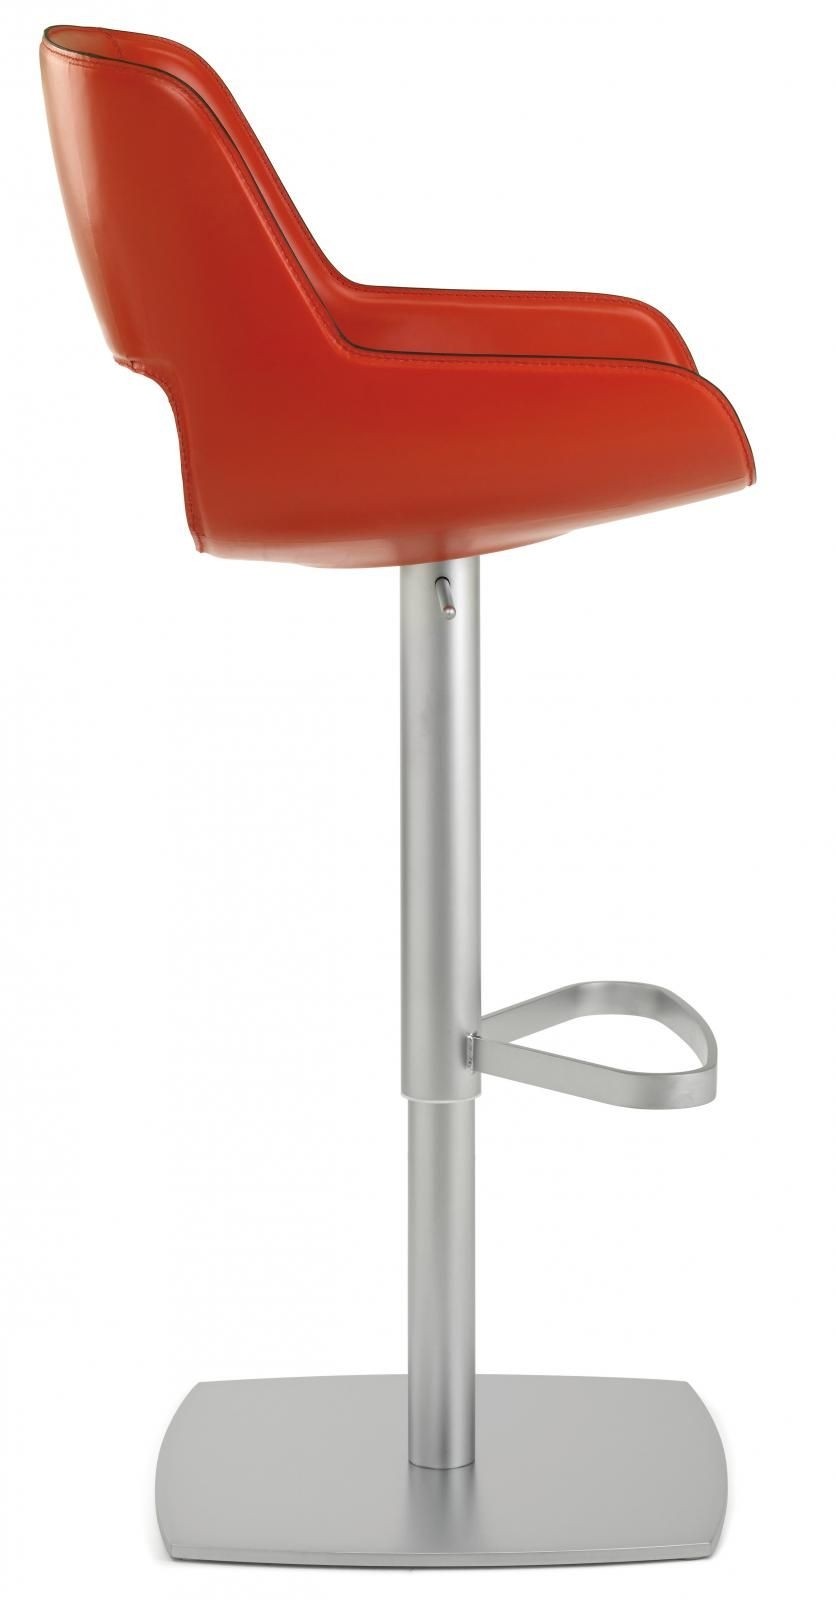 Beautiful designer stool with all of the italian quality and